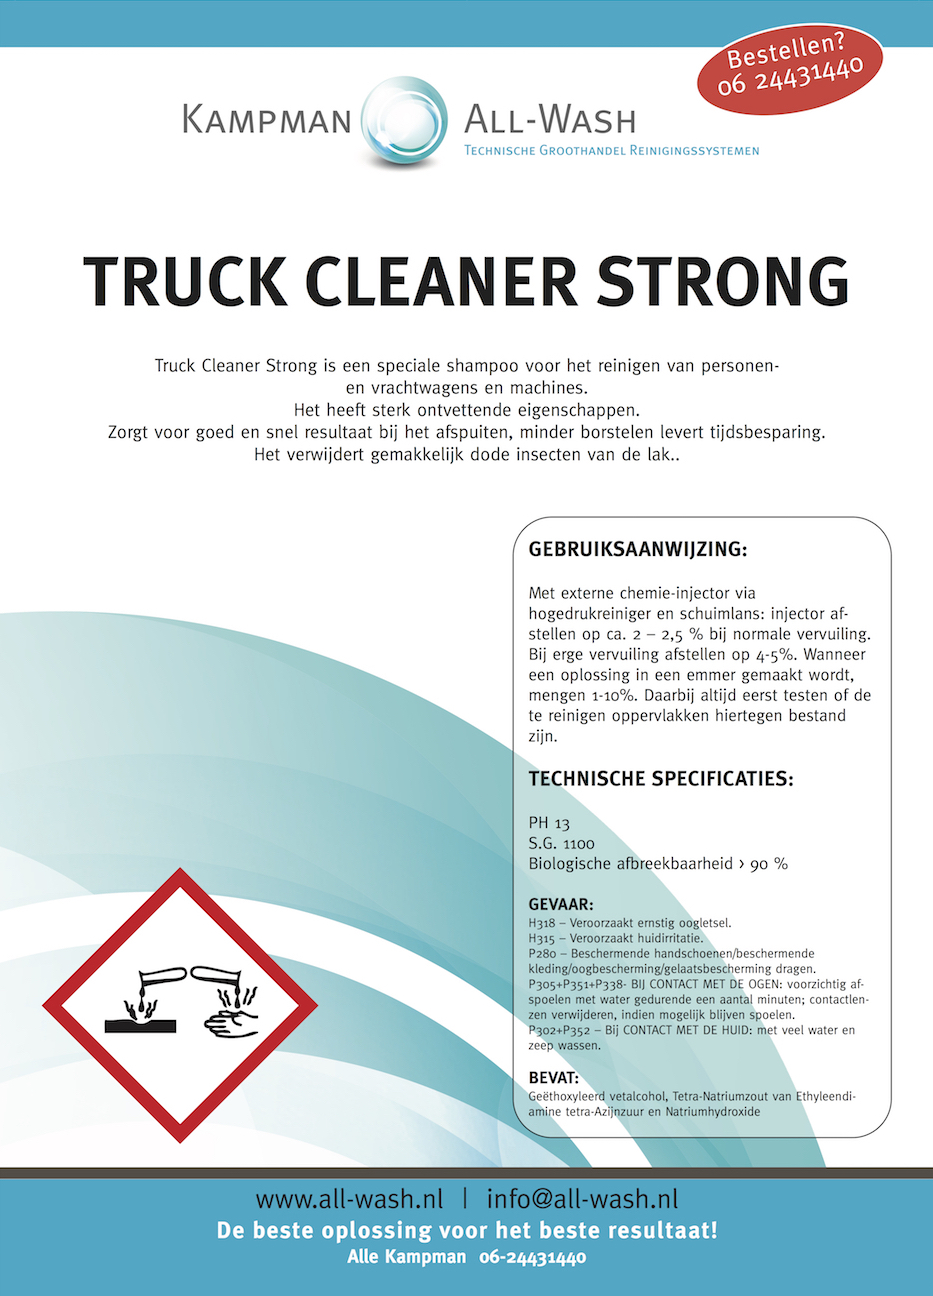 Truck Cleaner Strong